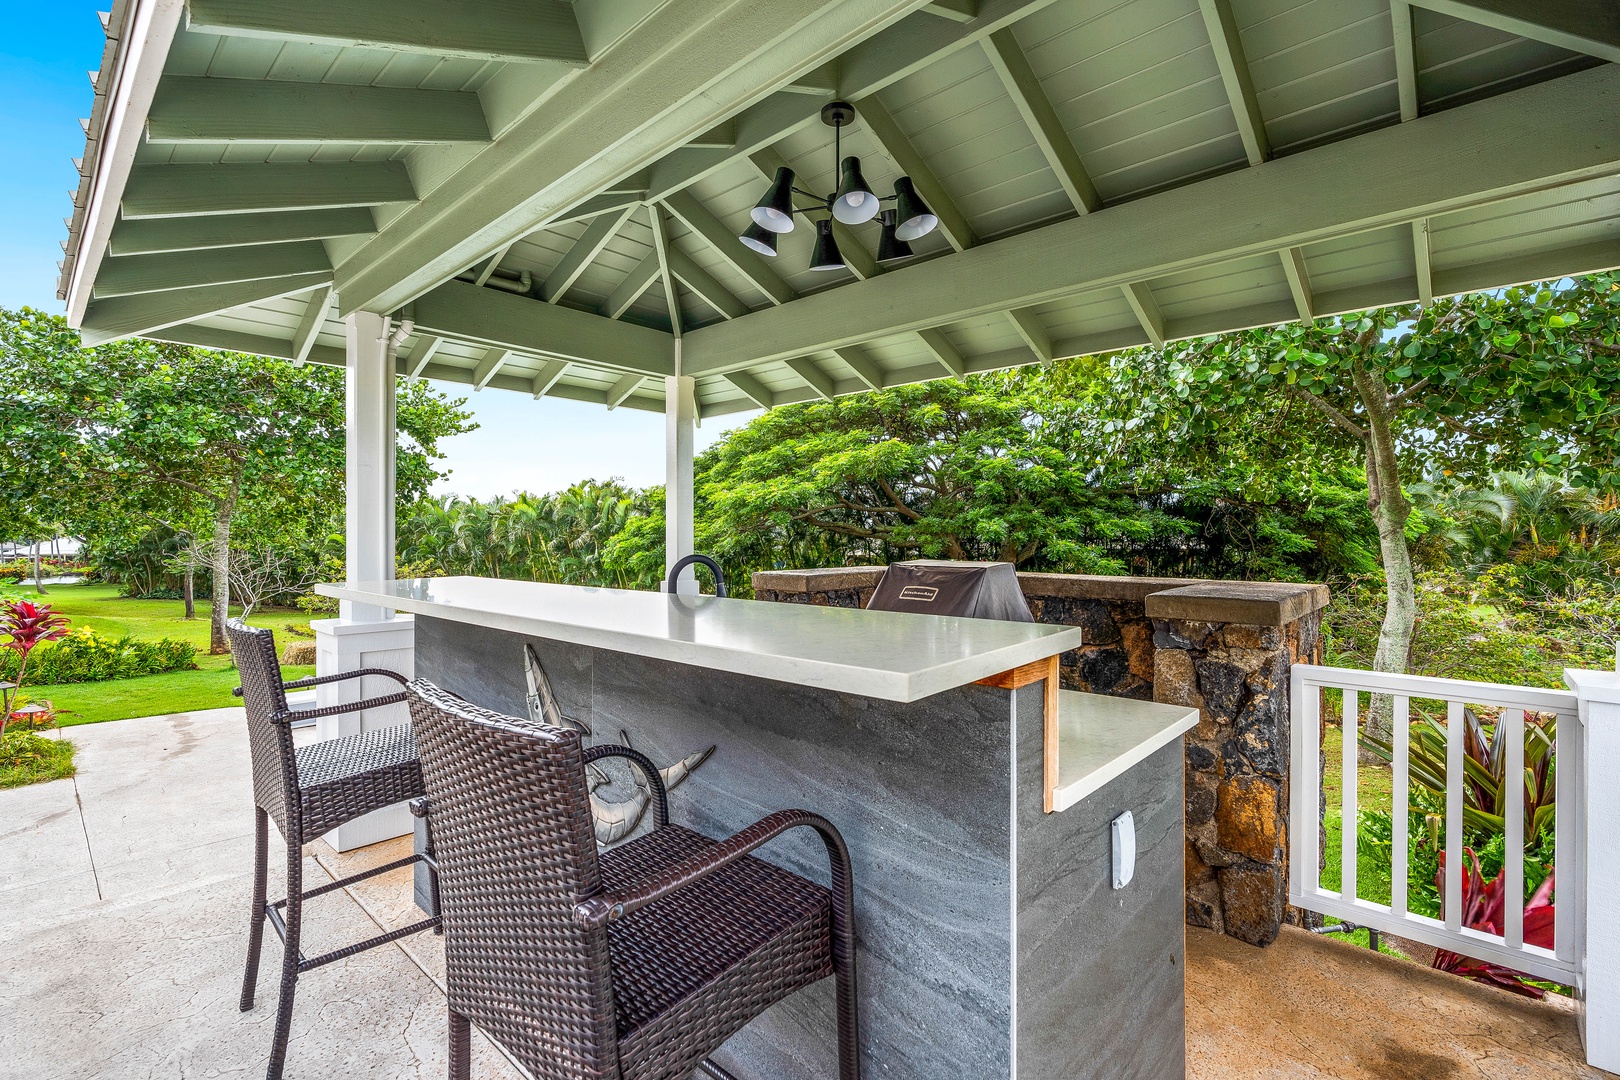 Koloa Vacation Rentals, JC Surf House - Outdoor grill and bar area